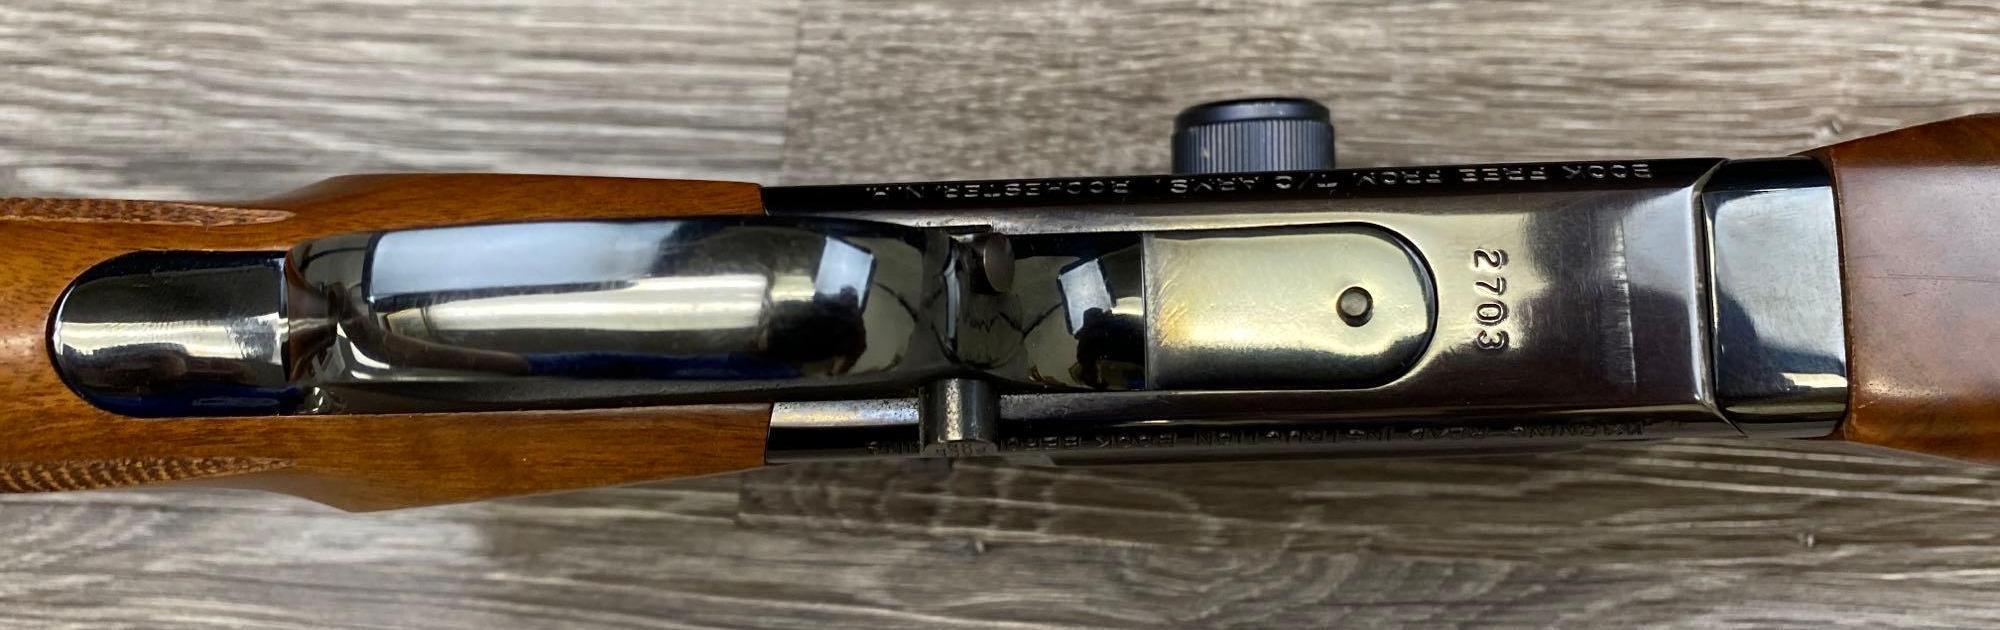 THOMPSON CENTER TCR-87 HUNTER DELUXE .223 REM. TOP-BREAK SINGLE-SHOT RIFLE WITH SCOPE